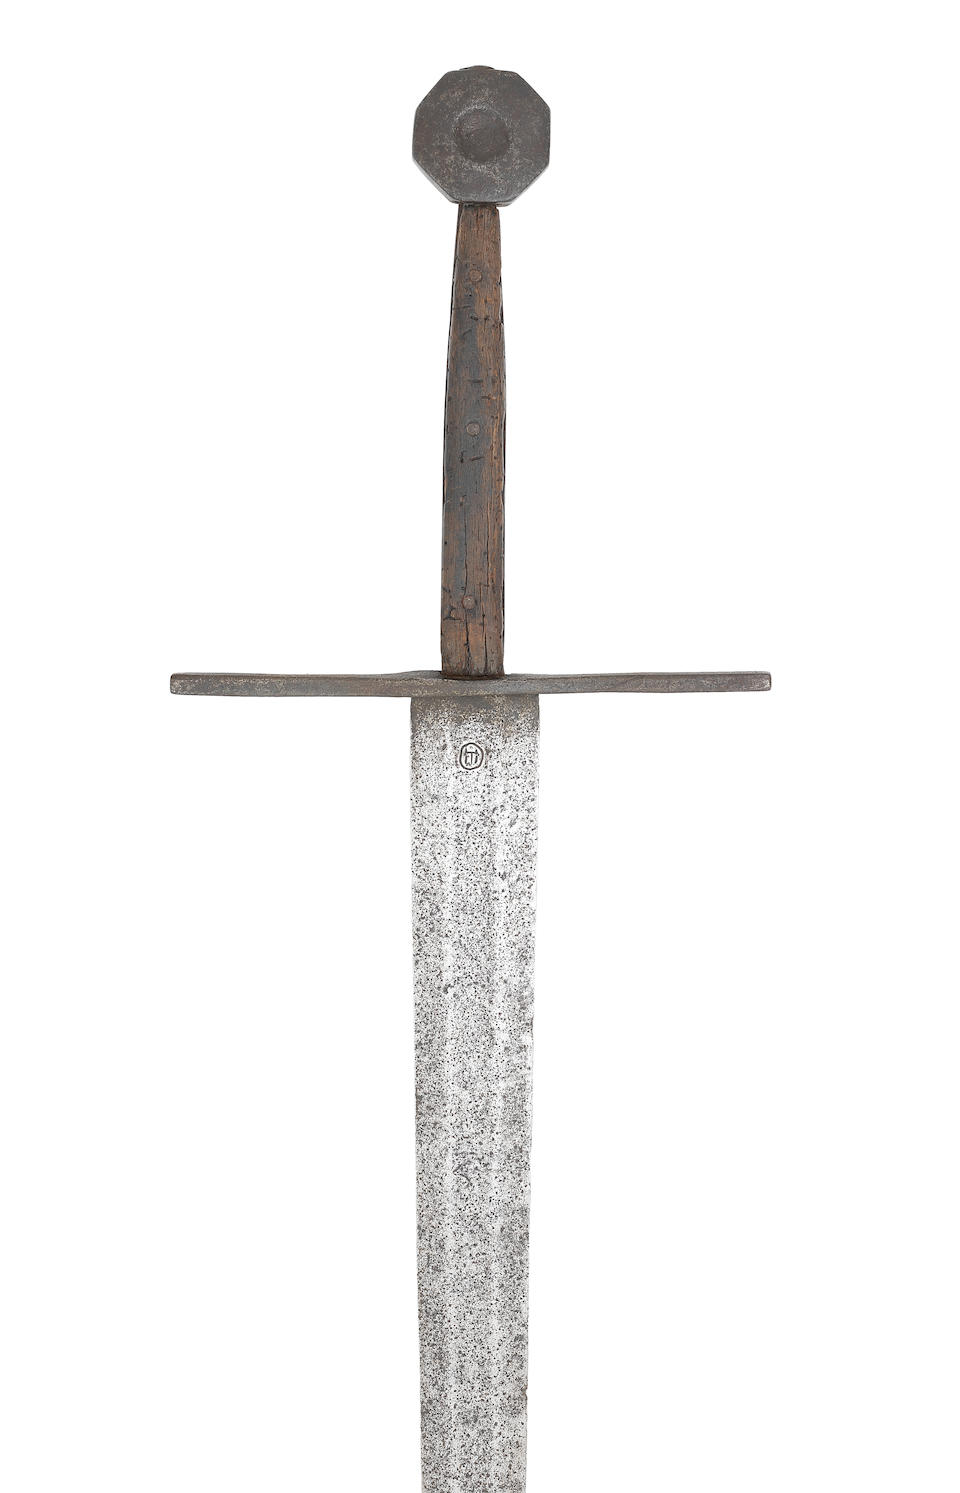 A Very Rare Medieval Knightly Sword Of Oakeshott Type XIII